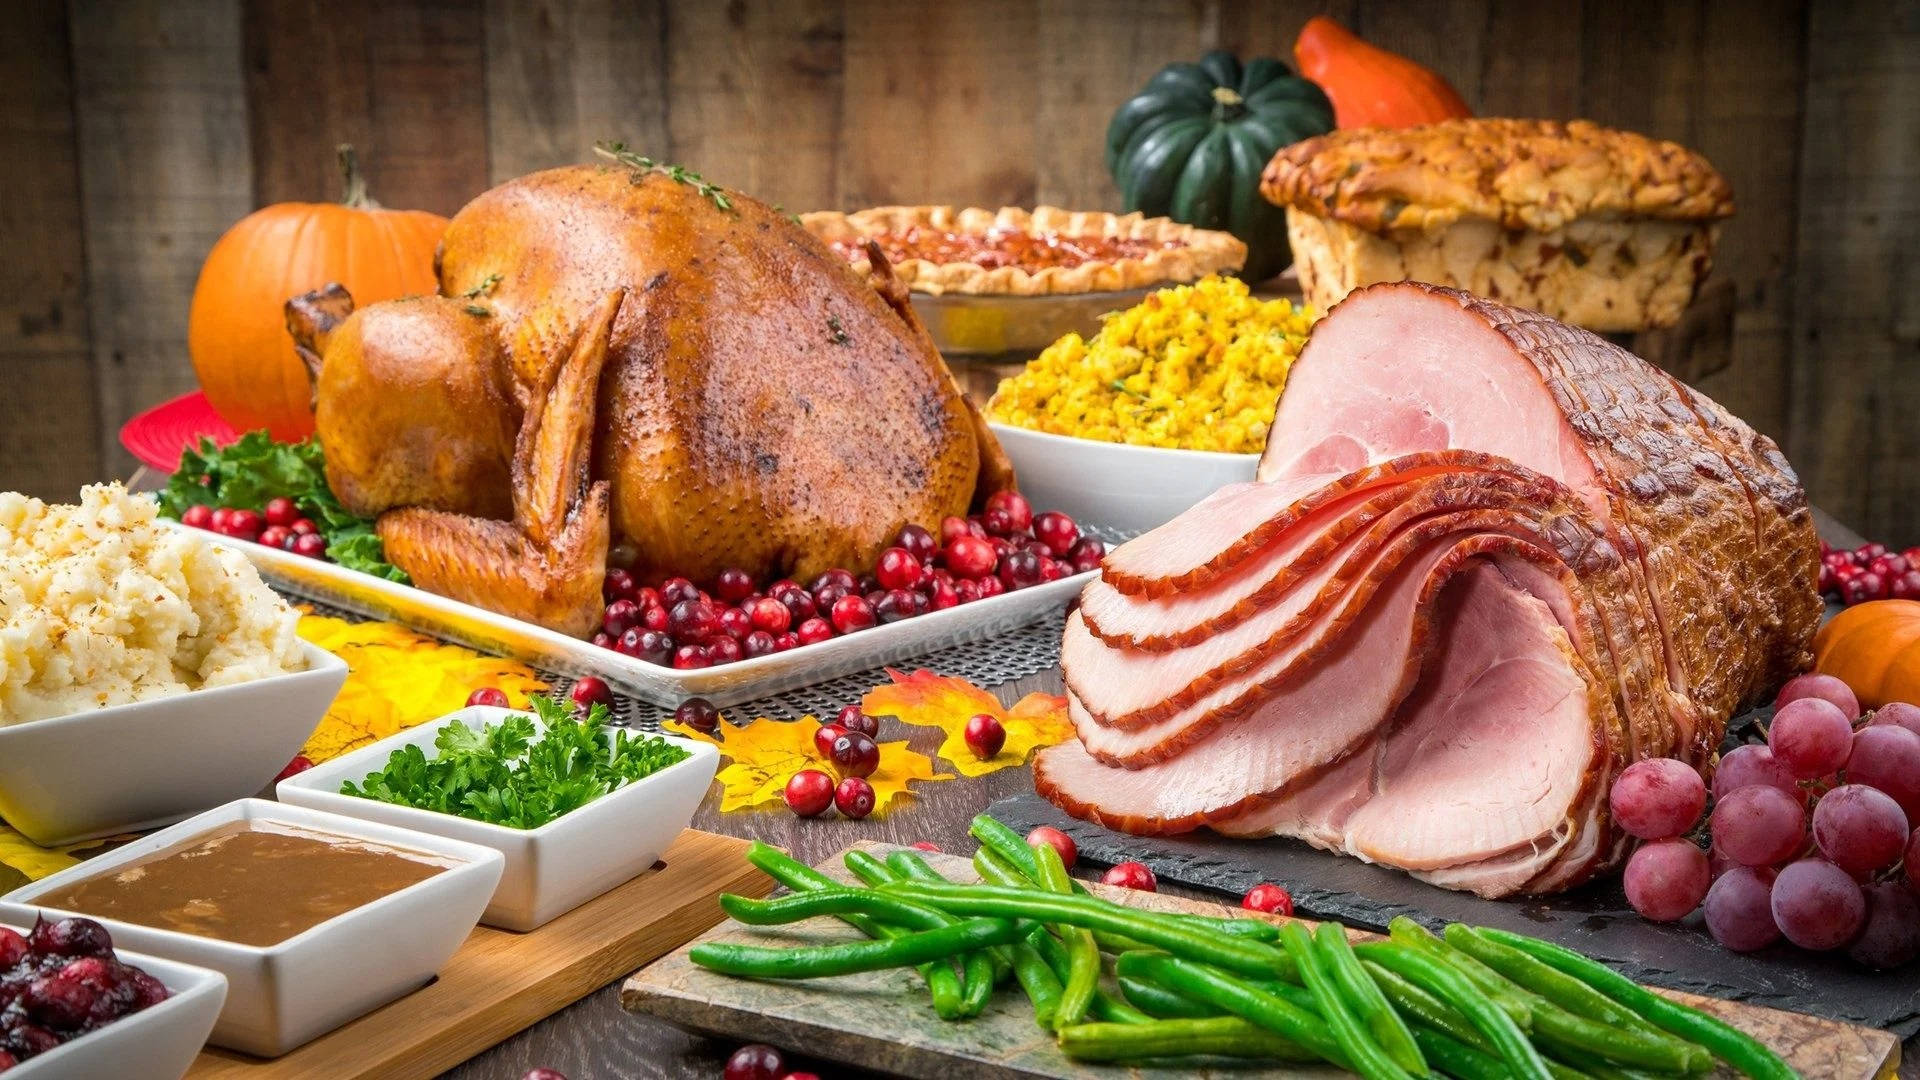 Ham And Roasted Turkey For Dinner Background